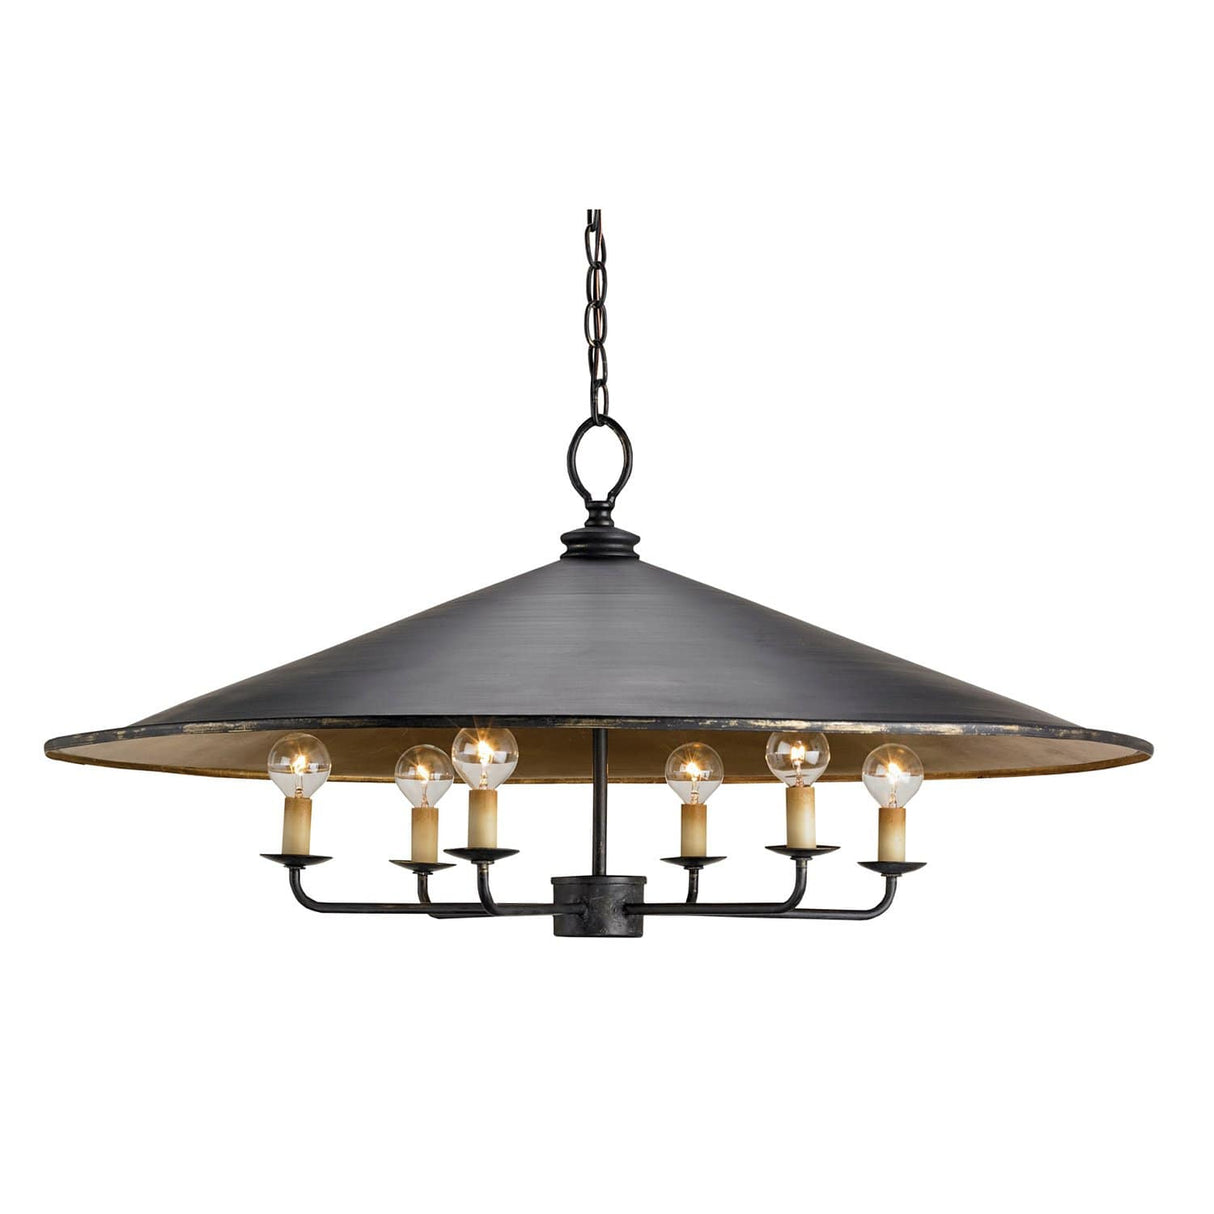 Currey and Company Brussels Pendant Lighting Currey-Co-9873